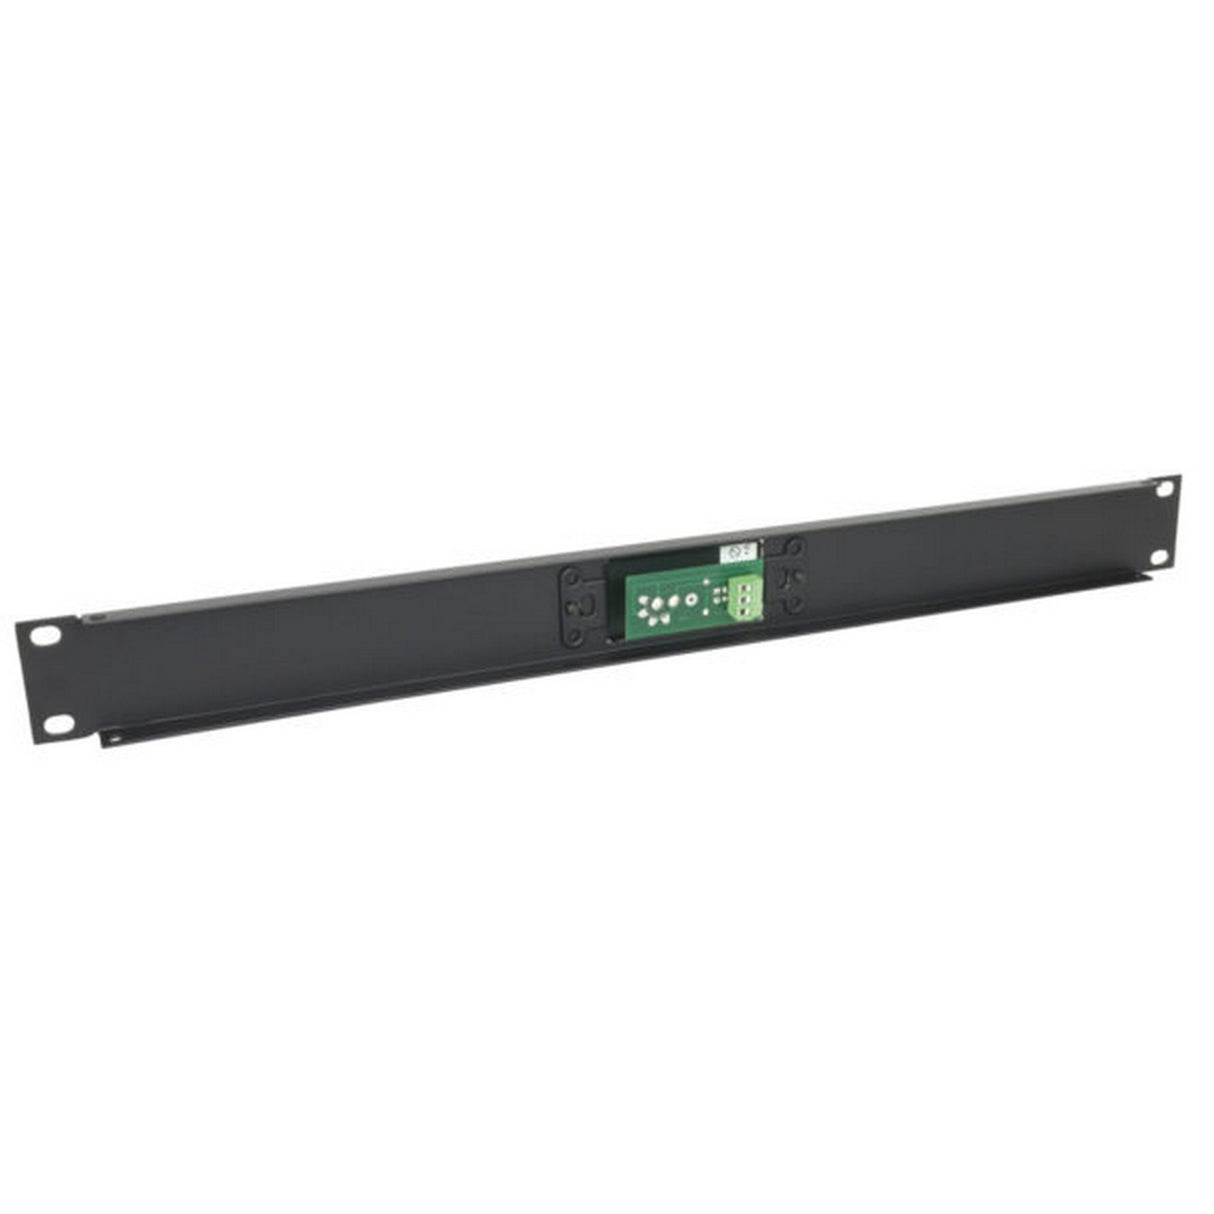 Lowell RPSB-MR Momentary Single Pole Single Throw Low-Voltage Rackmount Switch